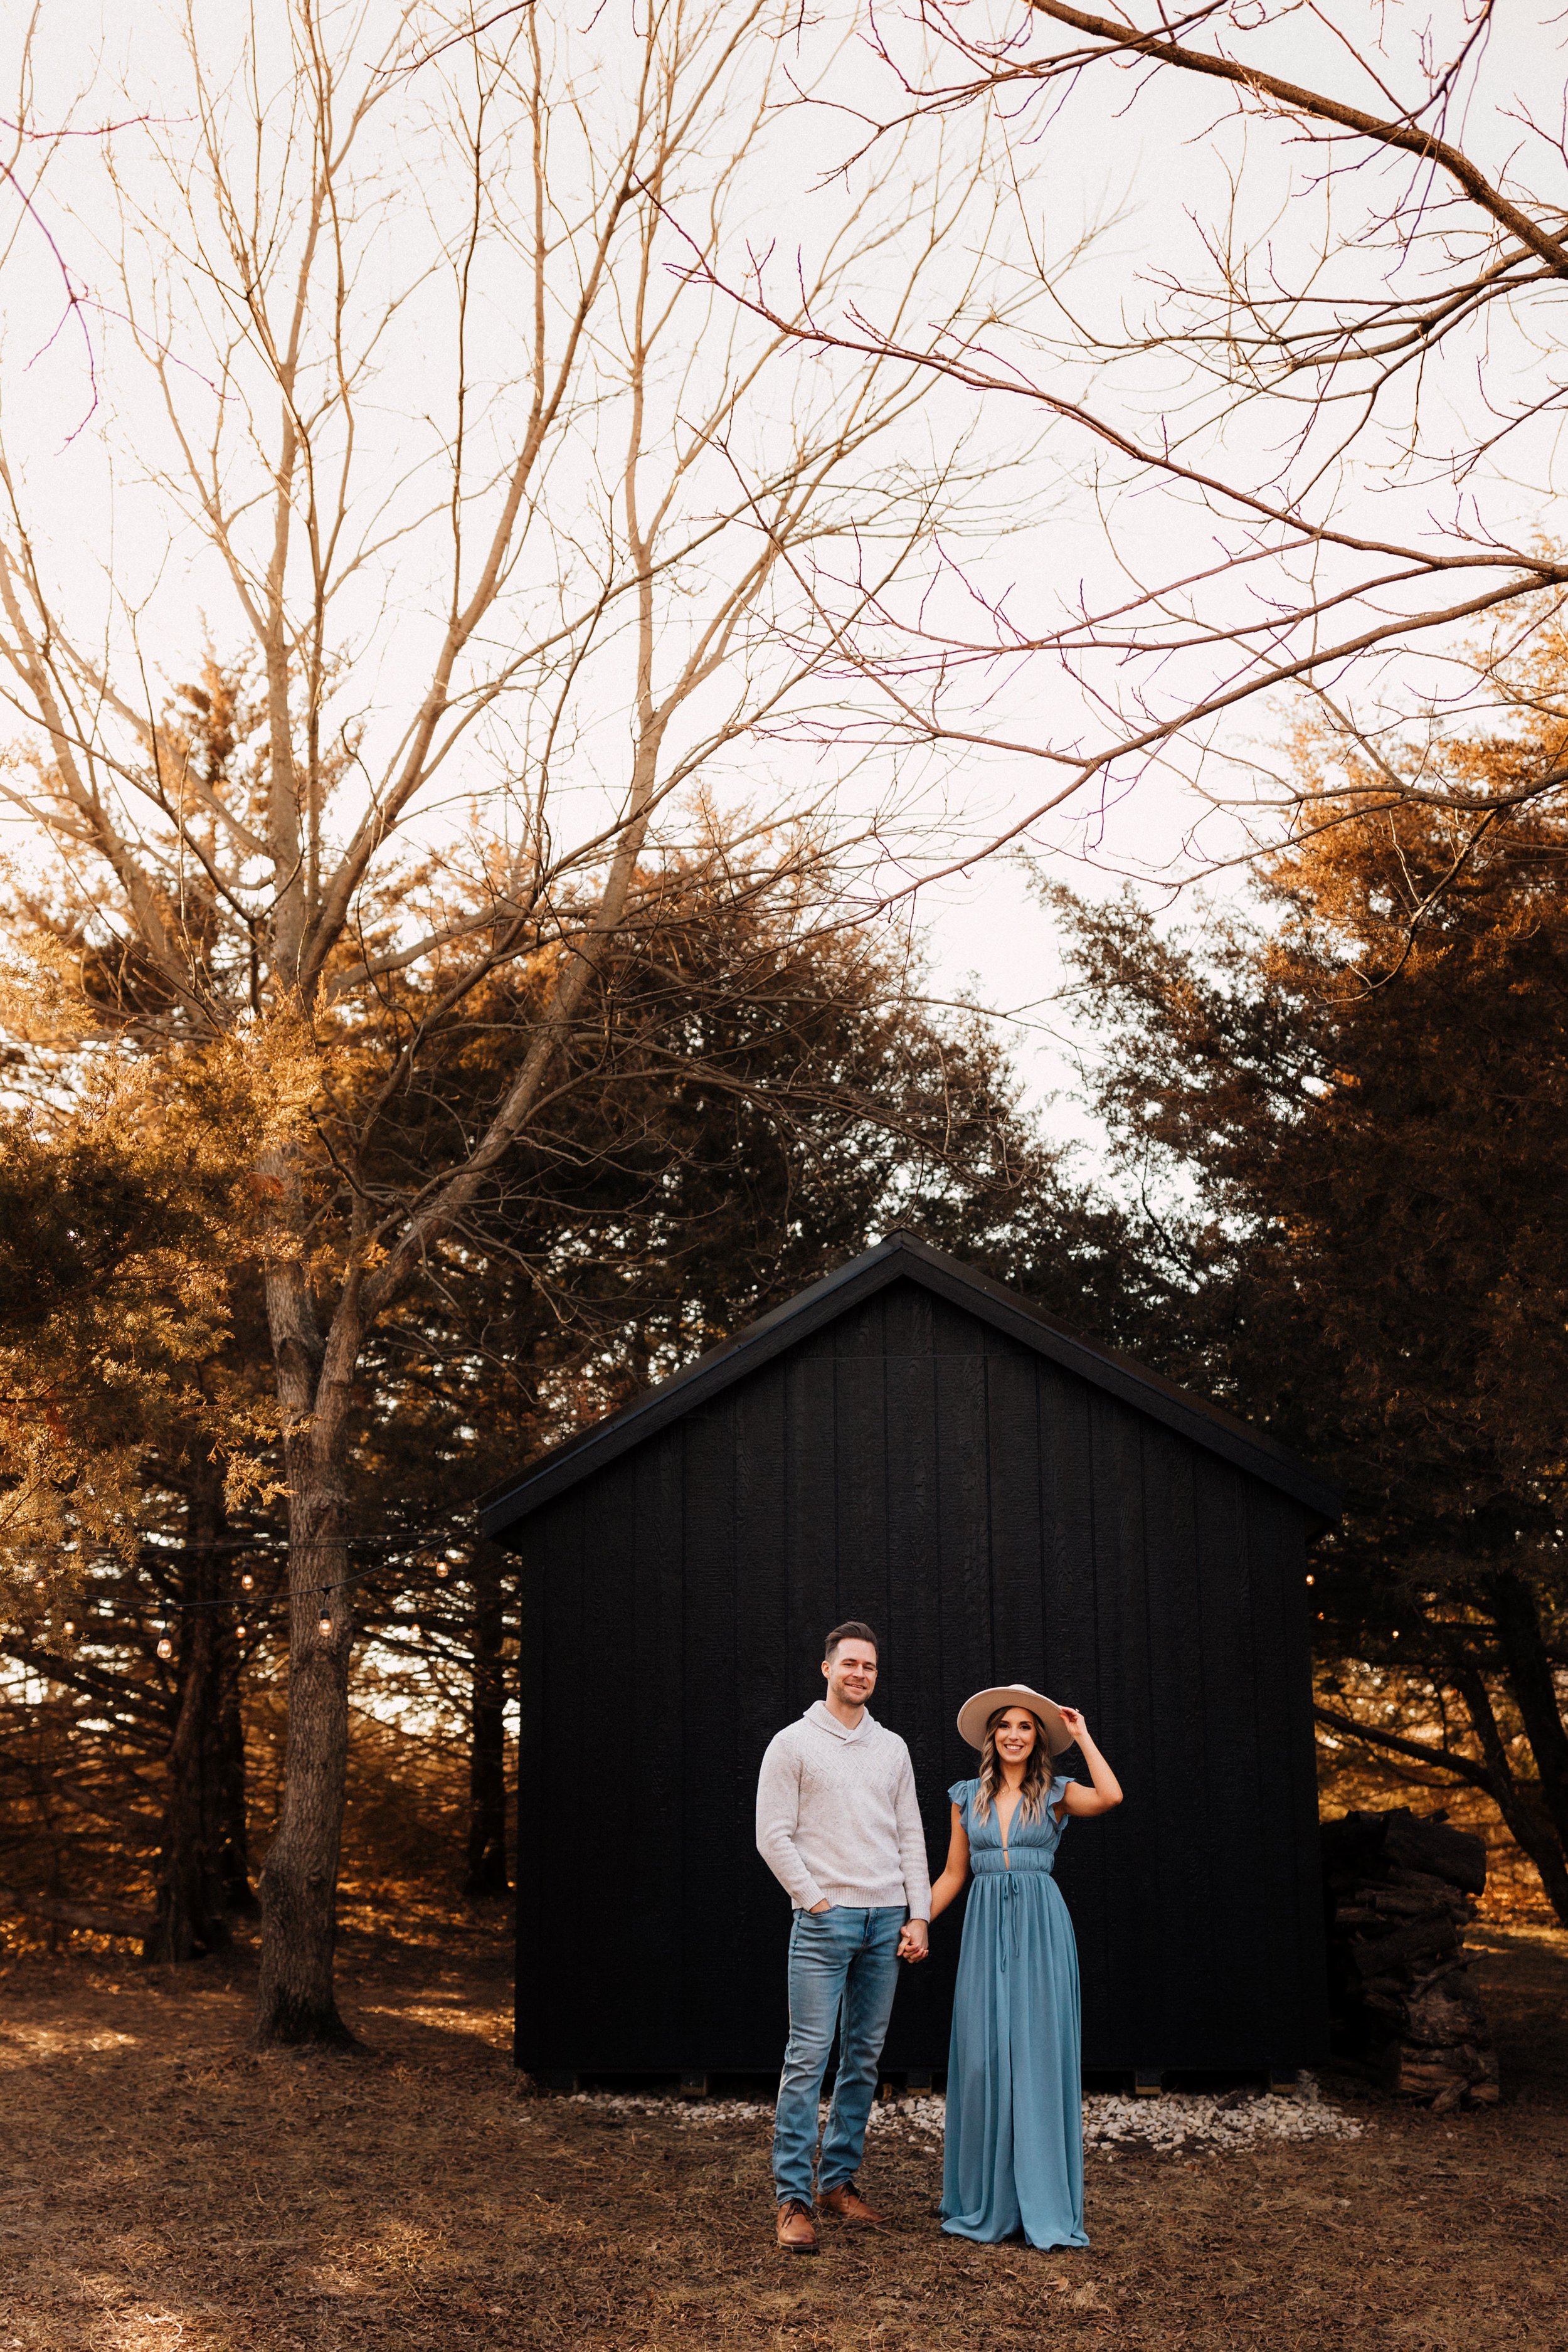 Laura_Ben_Engagment_Session_Winterset_Des_moines_Iowa_Couples_Photographer_Iris_Aisle_Cabin_Conservatory_Candid_Snow_Day_Winter_KMP_Photography-9278.jpg